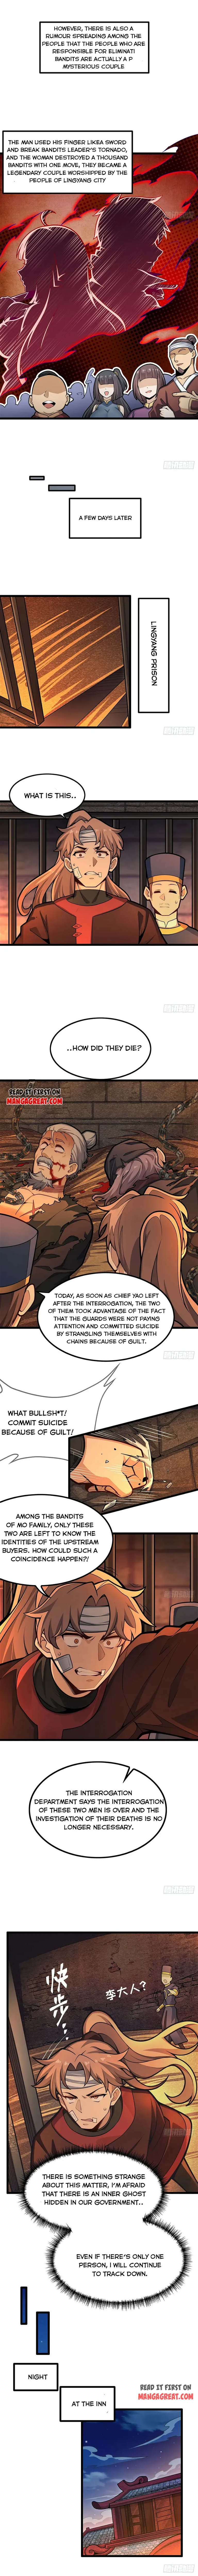 Infinite Apostles and Twelve War Girls Chapter 326 page 3